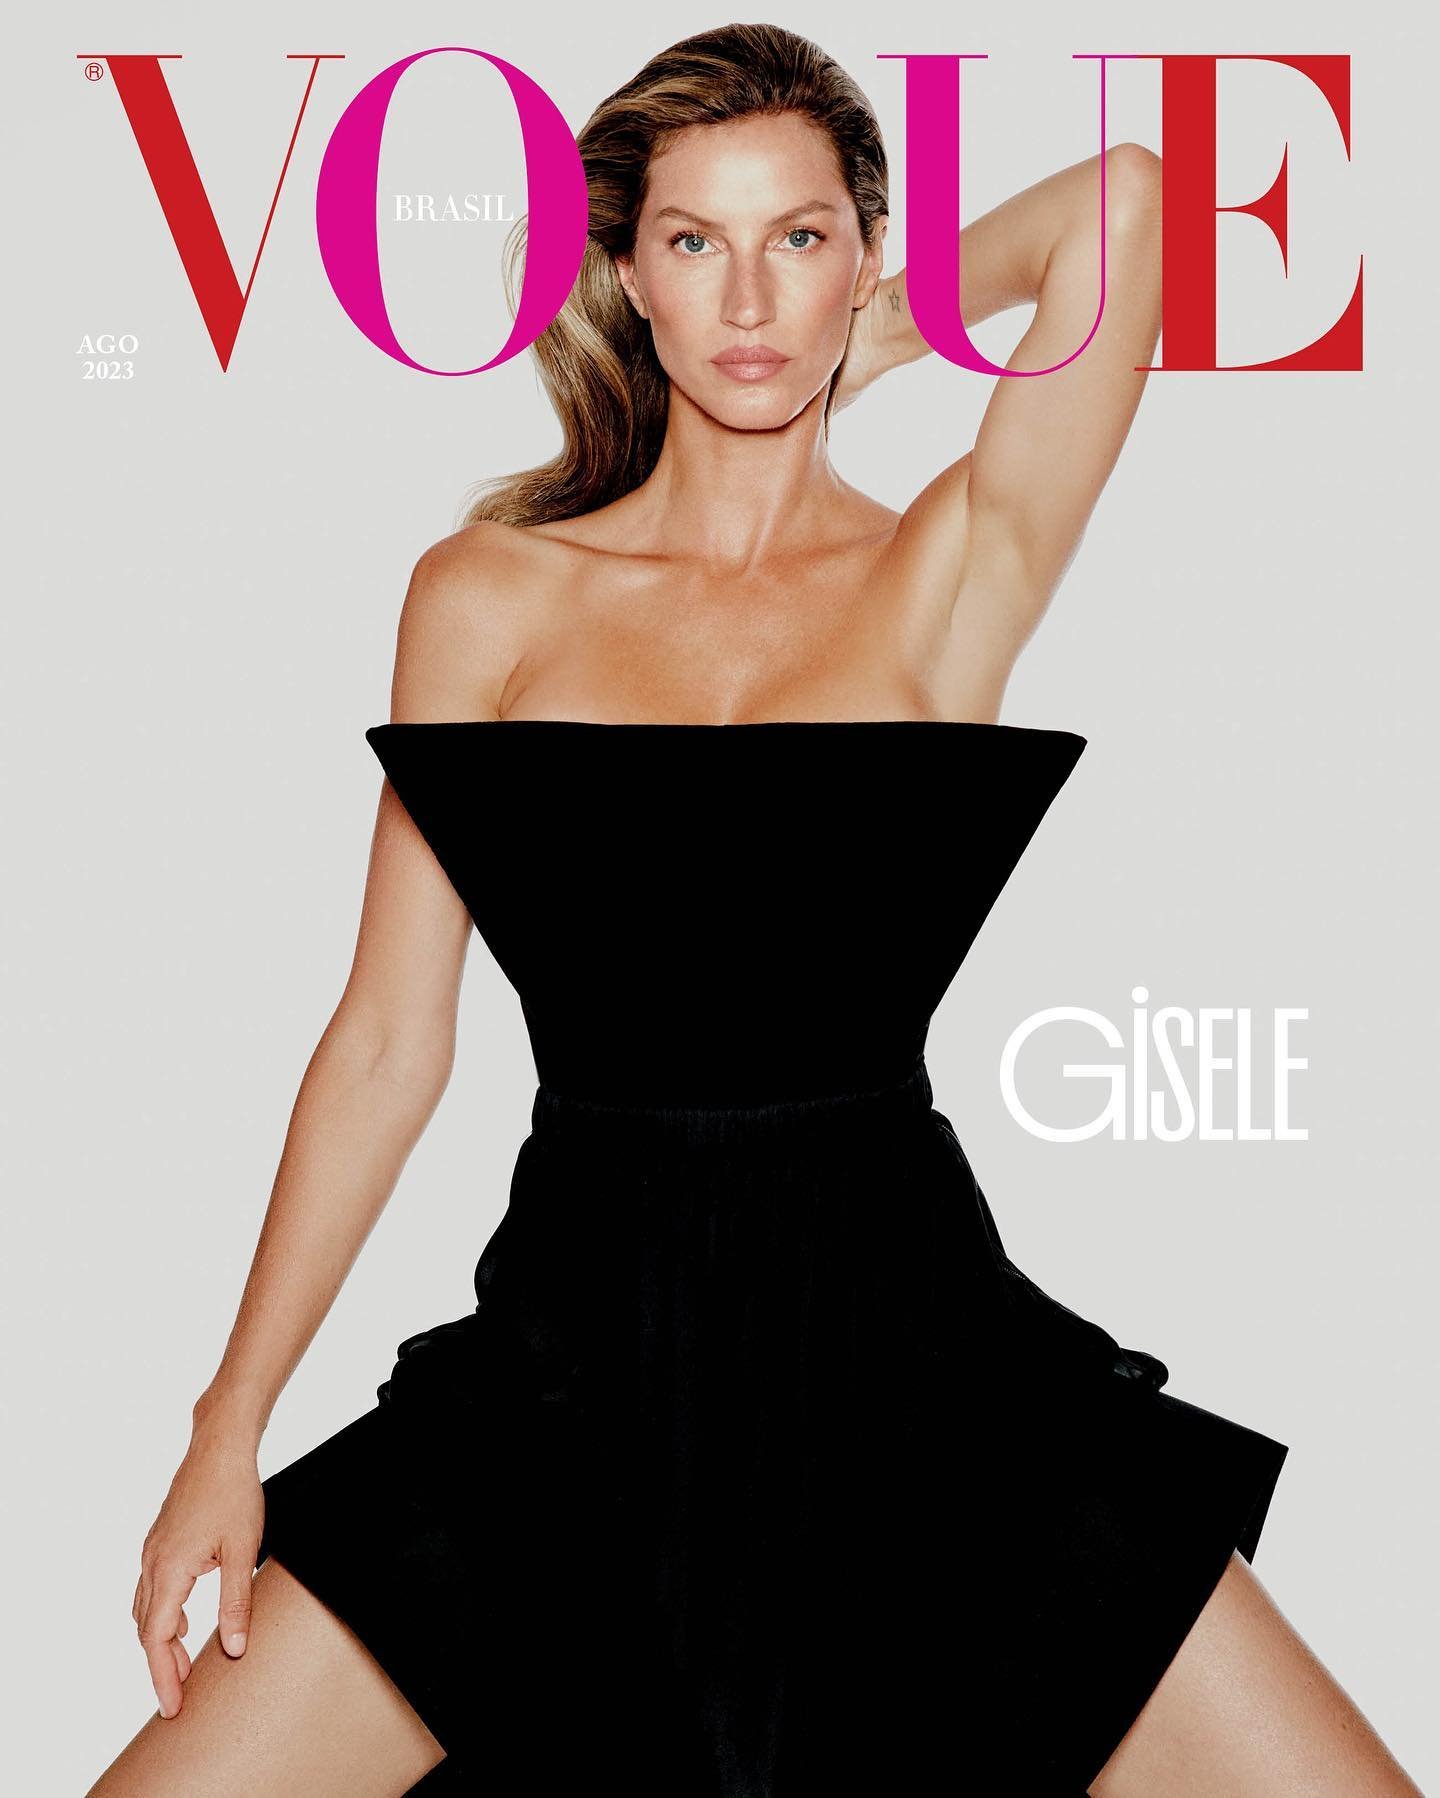 Gisele-by-Lufre-for-Vogue-Brasil-August-2023-4.jpg